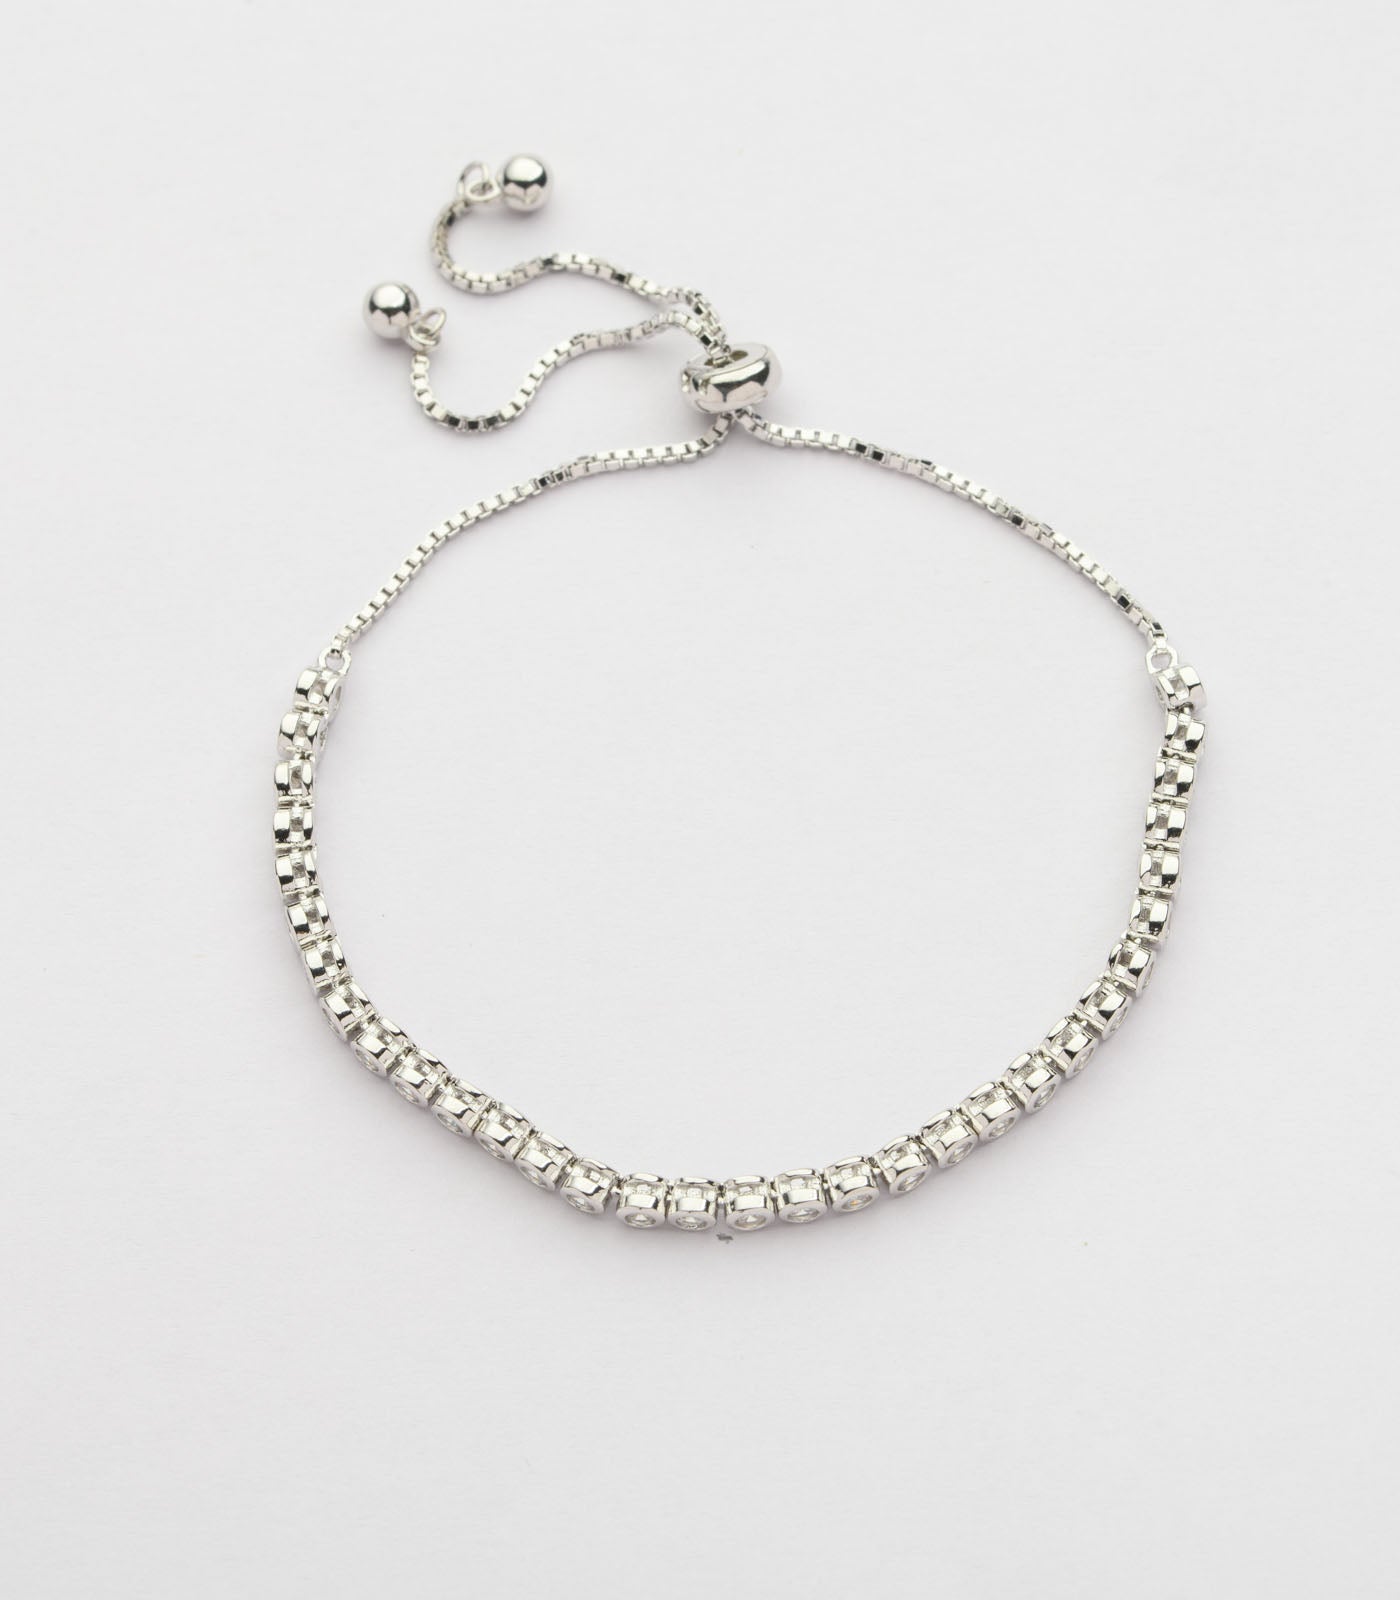 Stone Sequence Bracelet (Silver)